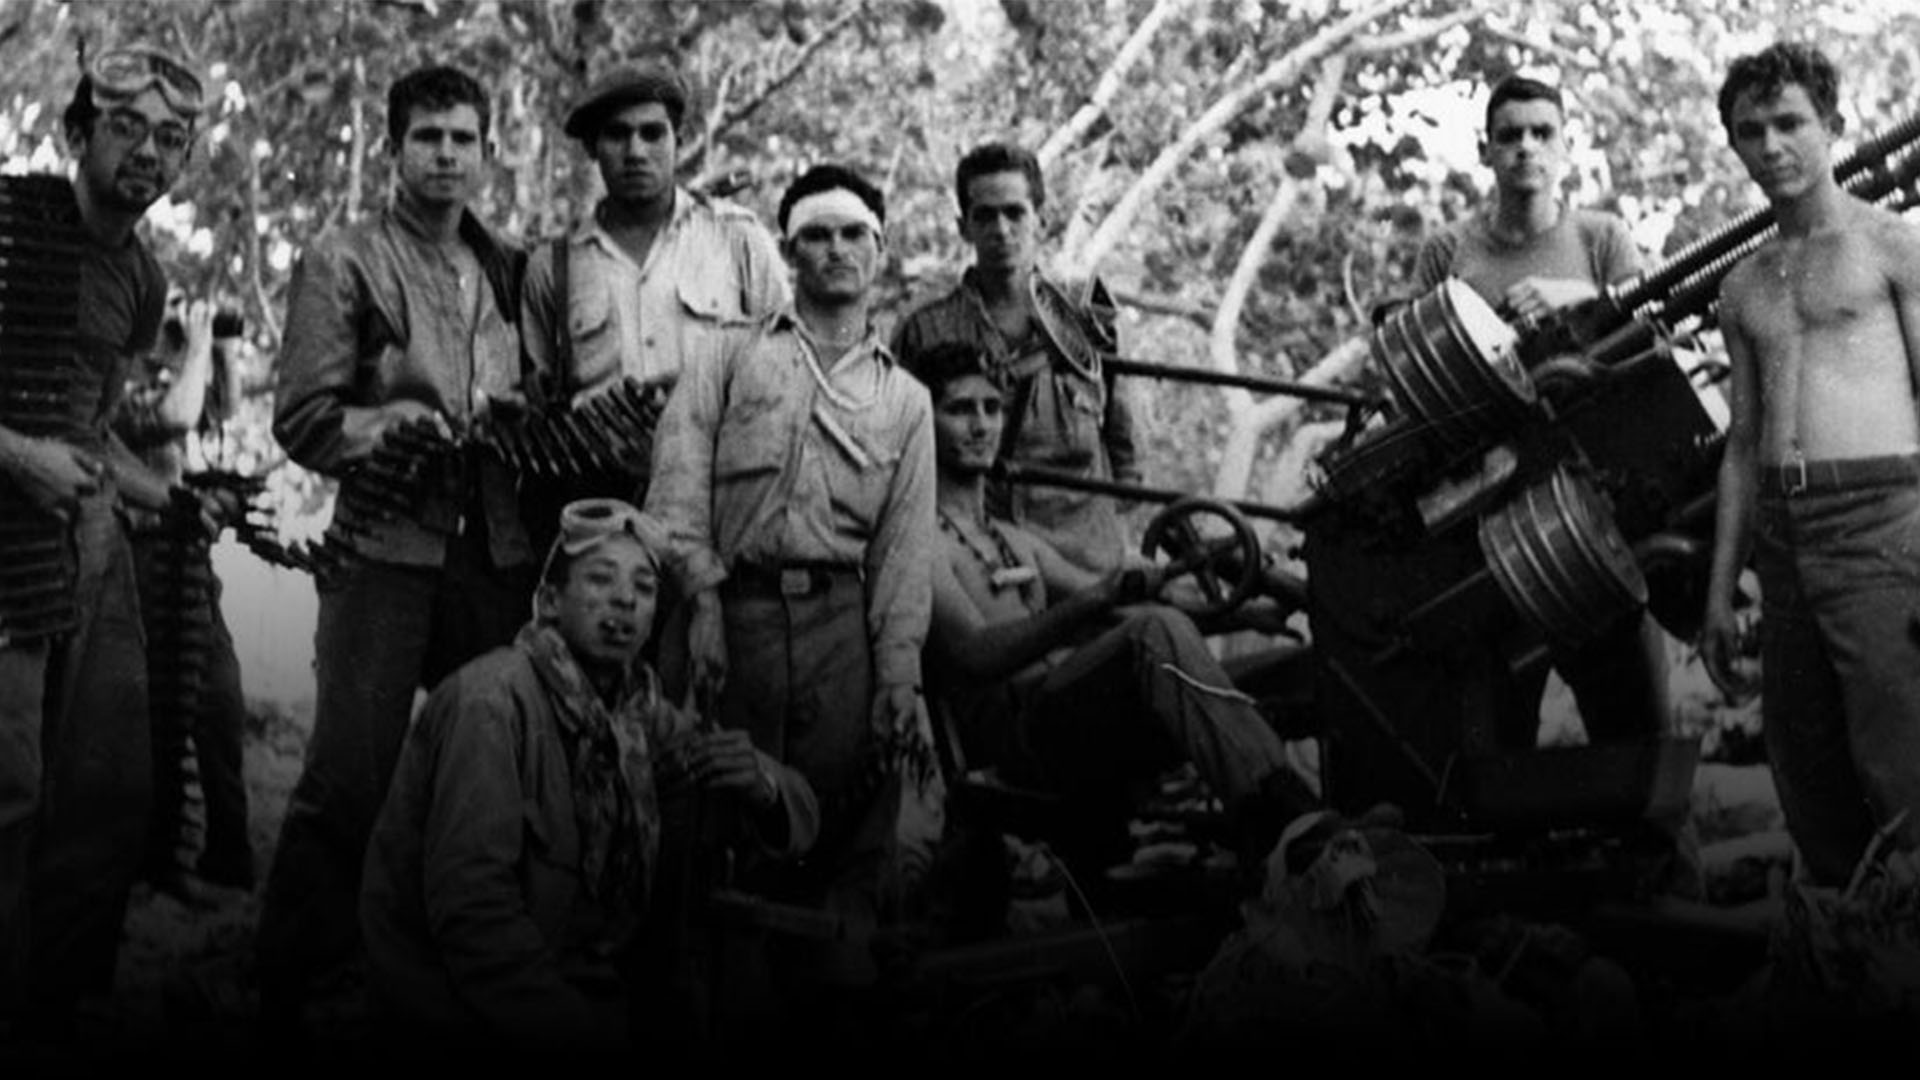 Why the Bay of Pigs Invasion Went So Wrong